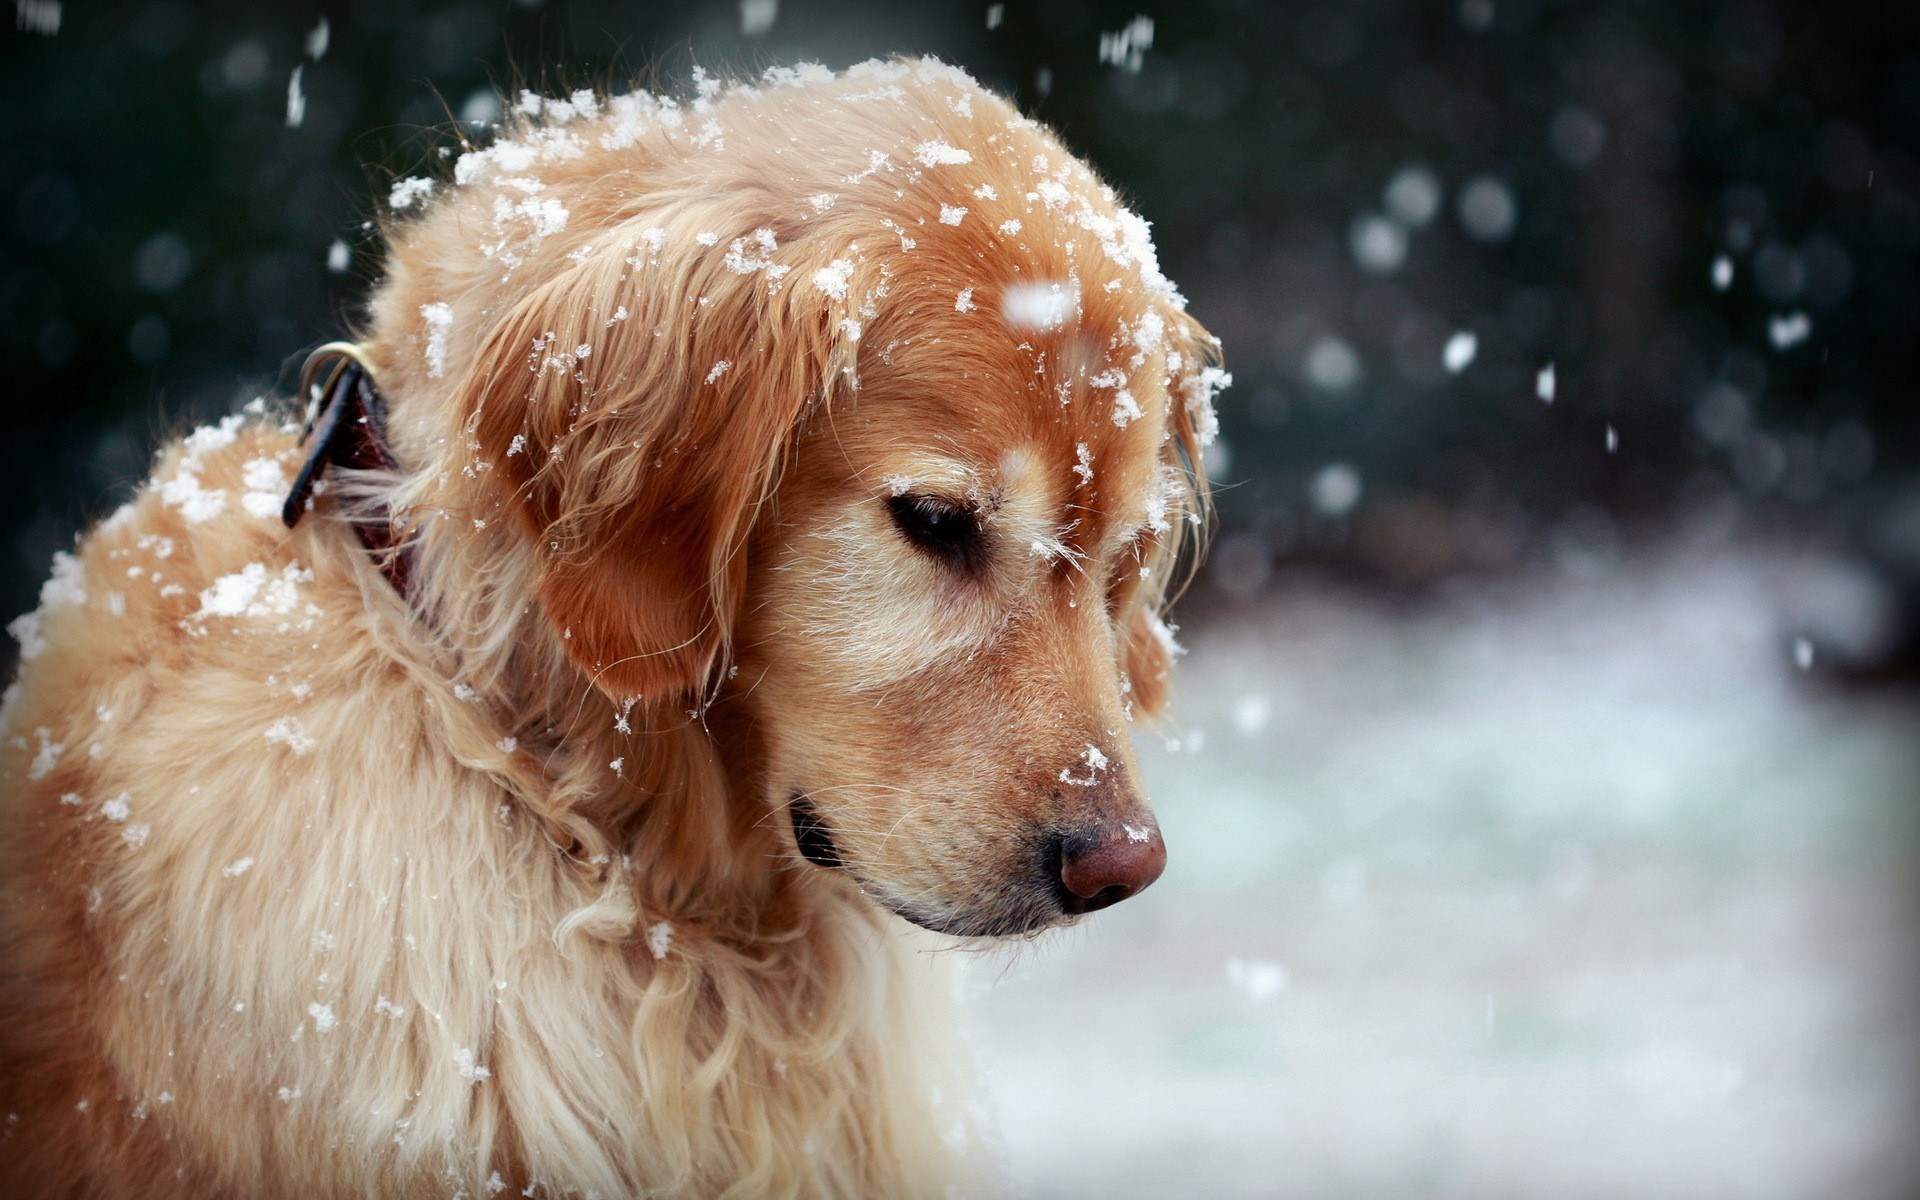 winter-dog-snowflakes-hd-wallpaper-Dog-wallpaper-HD-free-wallpapers-backgrounds-images-FHD-4k-download-2014-2015-2016